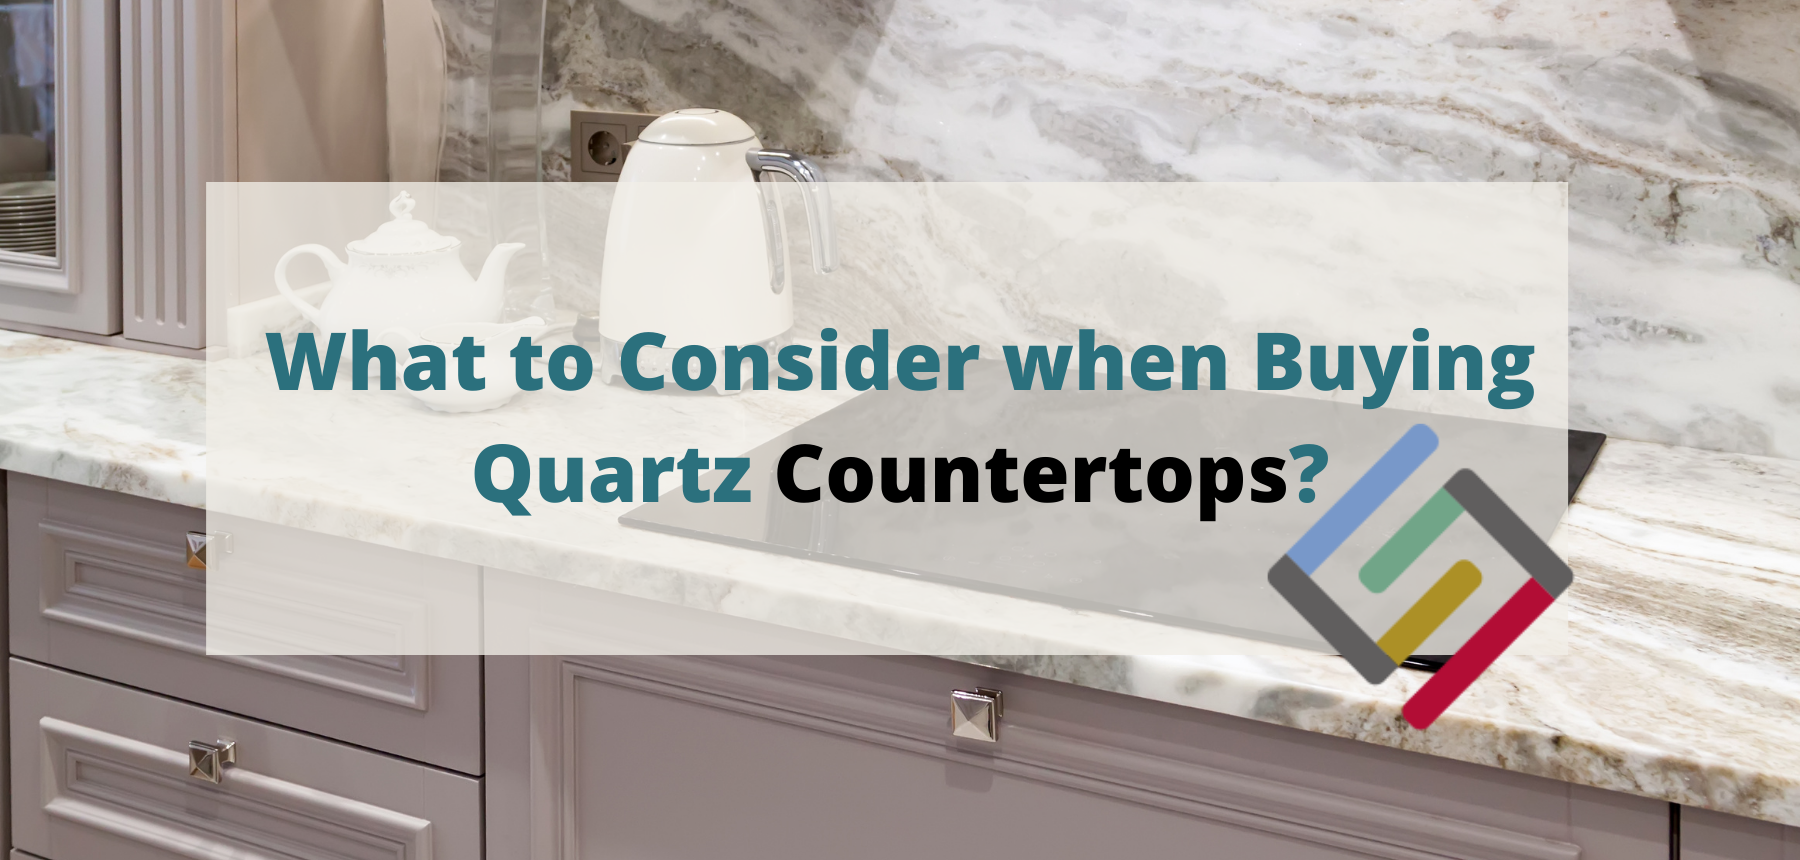 What to Consider when Buying Quartz Countertops